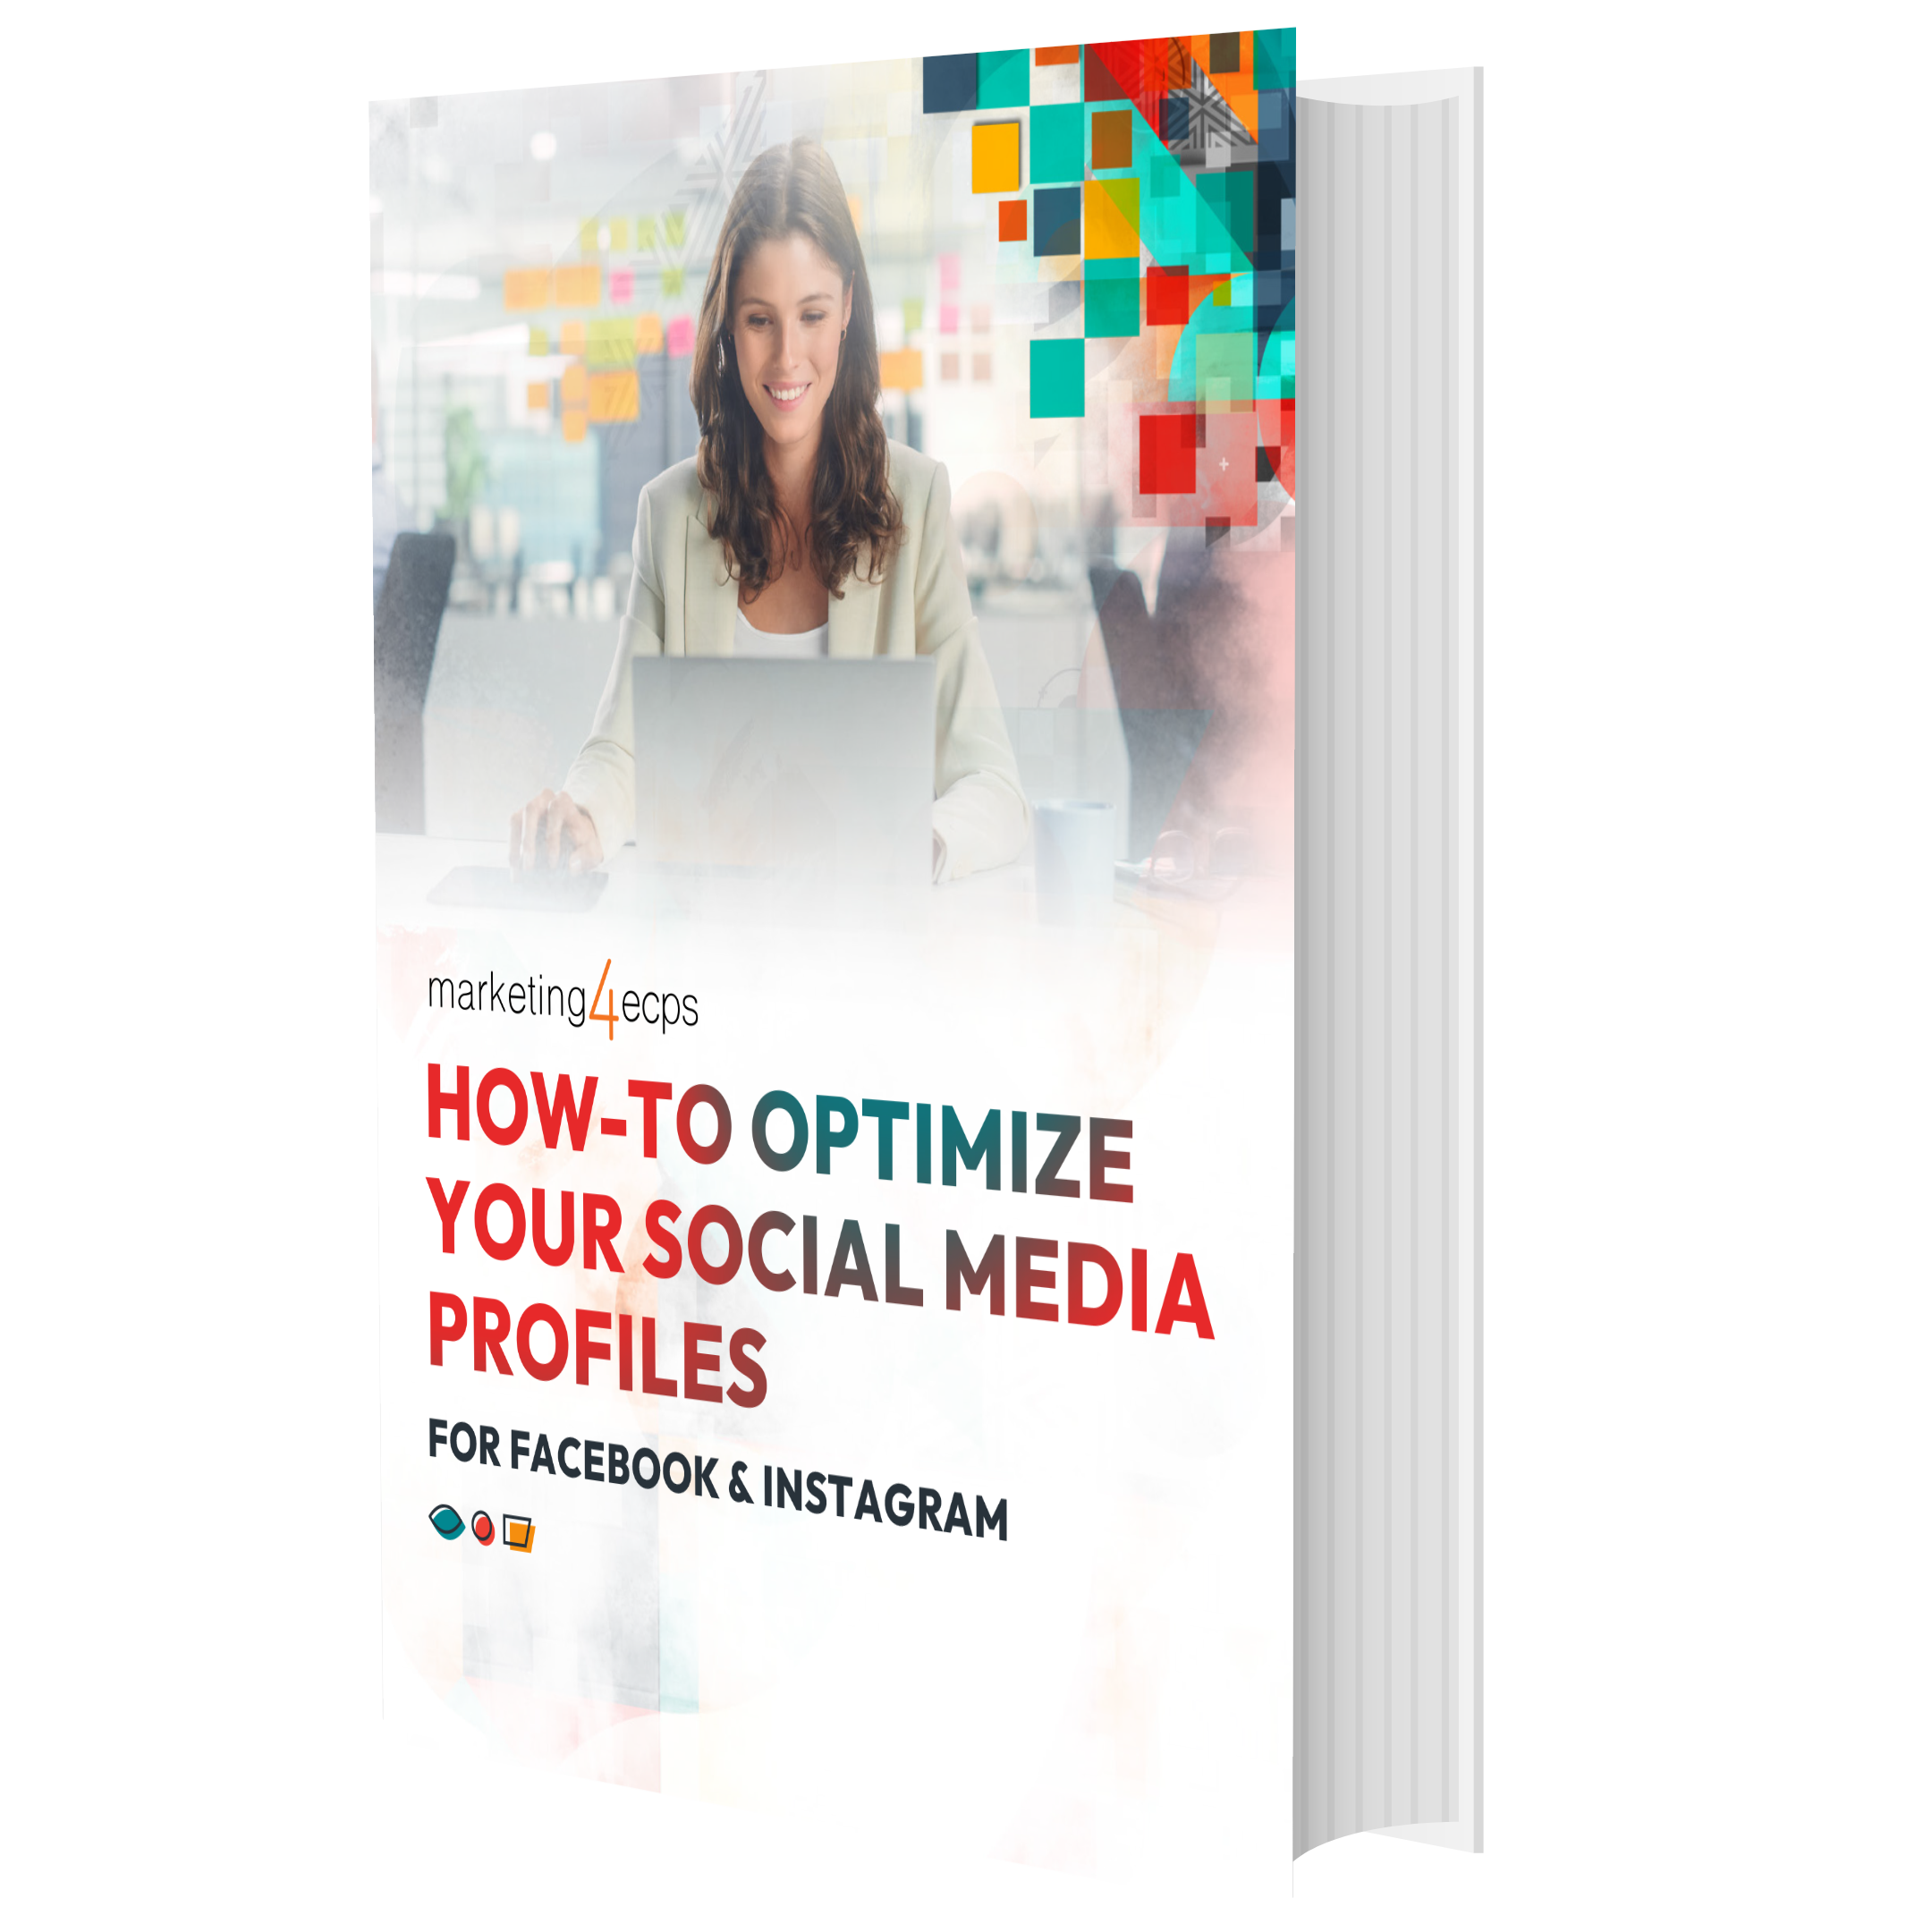 How-to Optimize Your Social Media Profiles